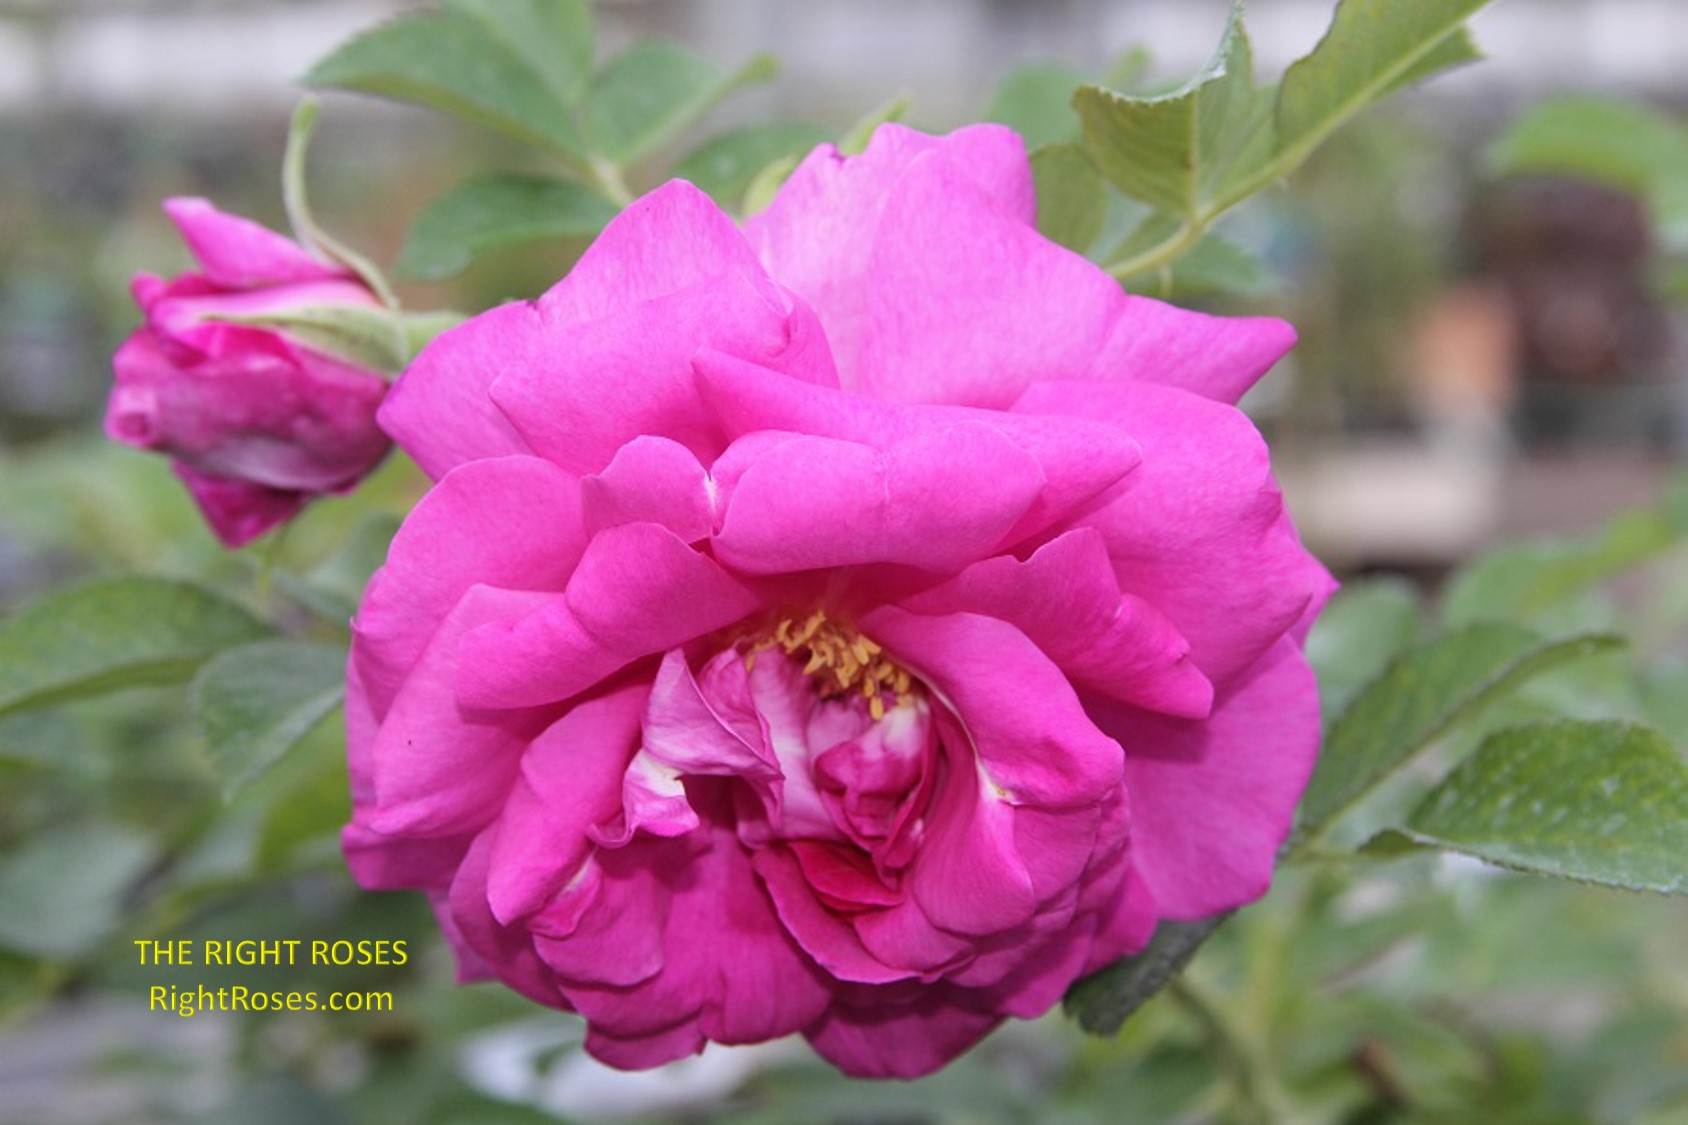 Wild Edric rose review the right roses score best top garden store david austin english roses rose products rose rating the right leap rose food fertilizer